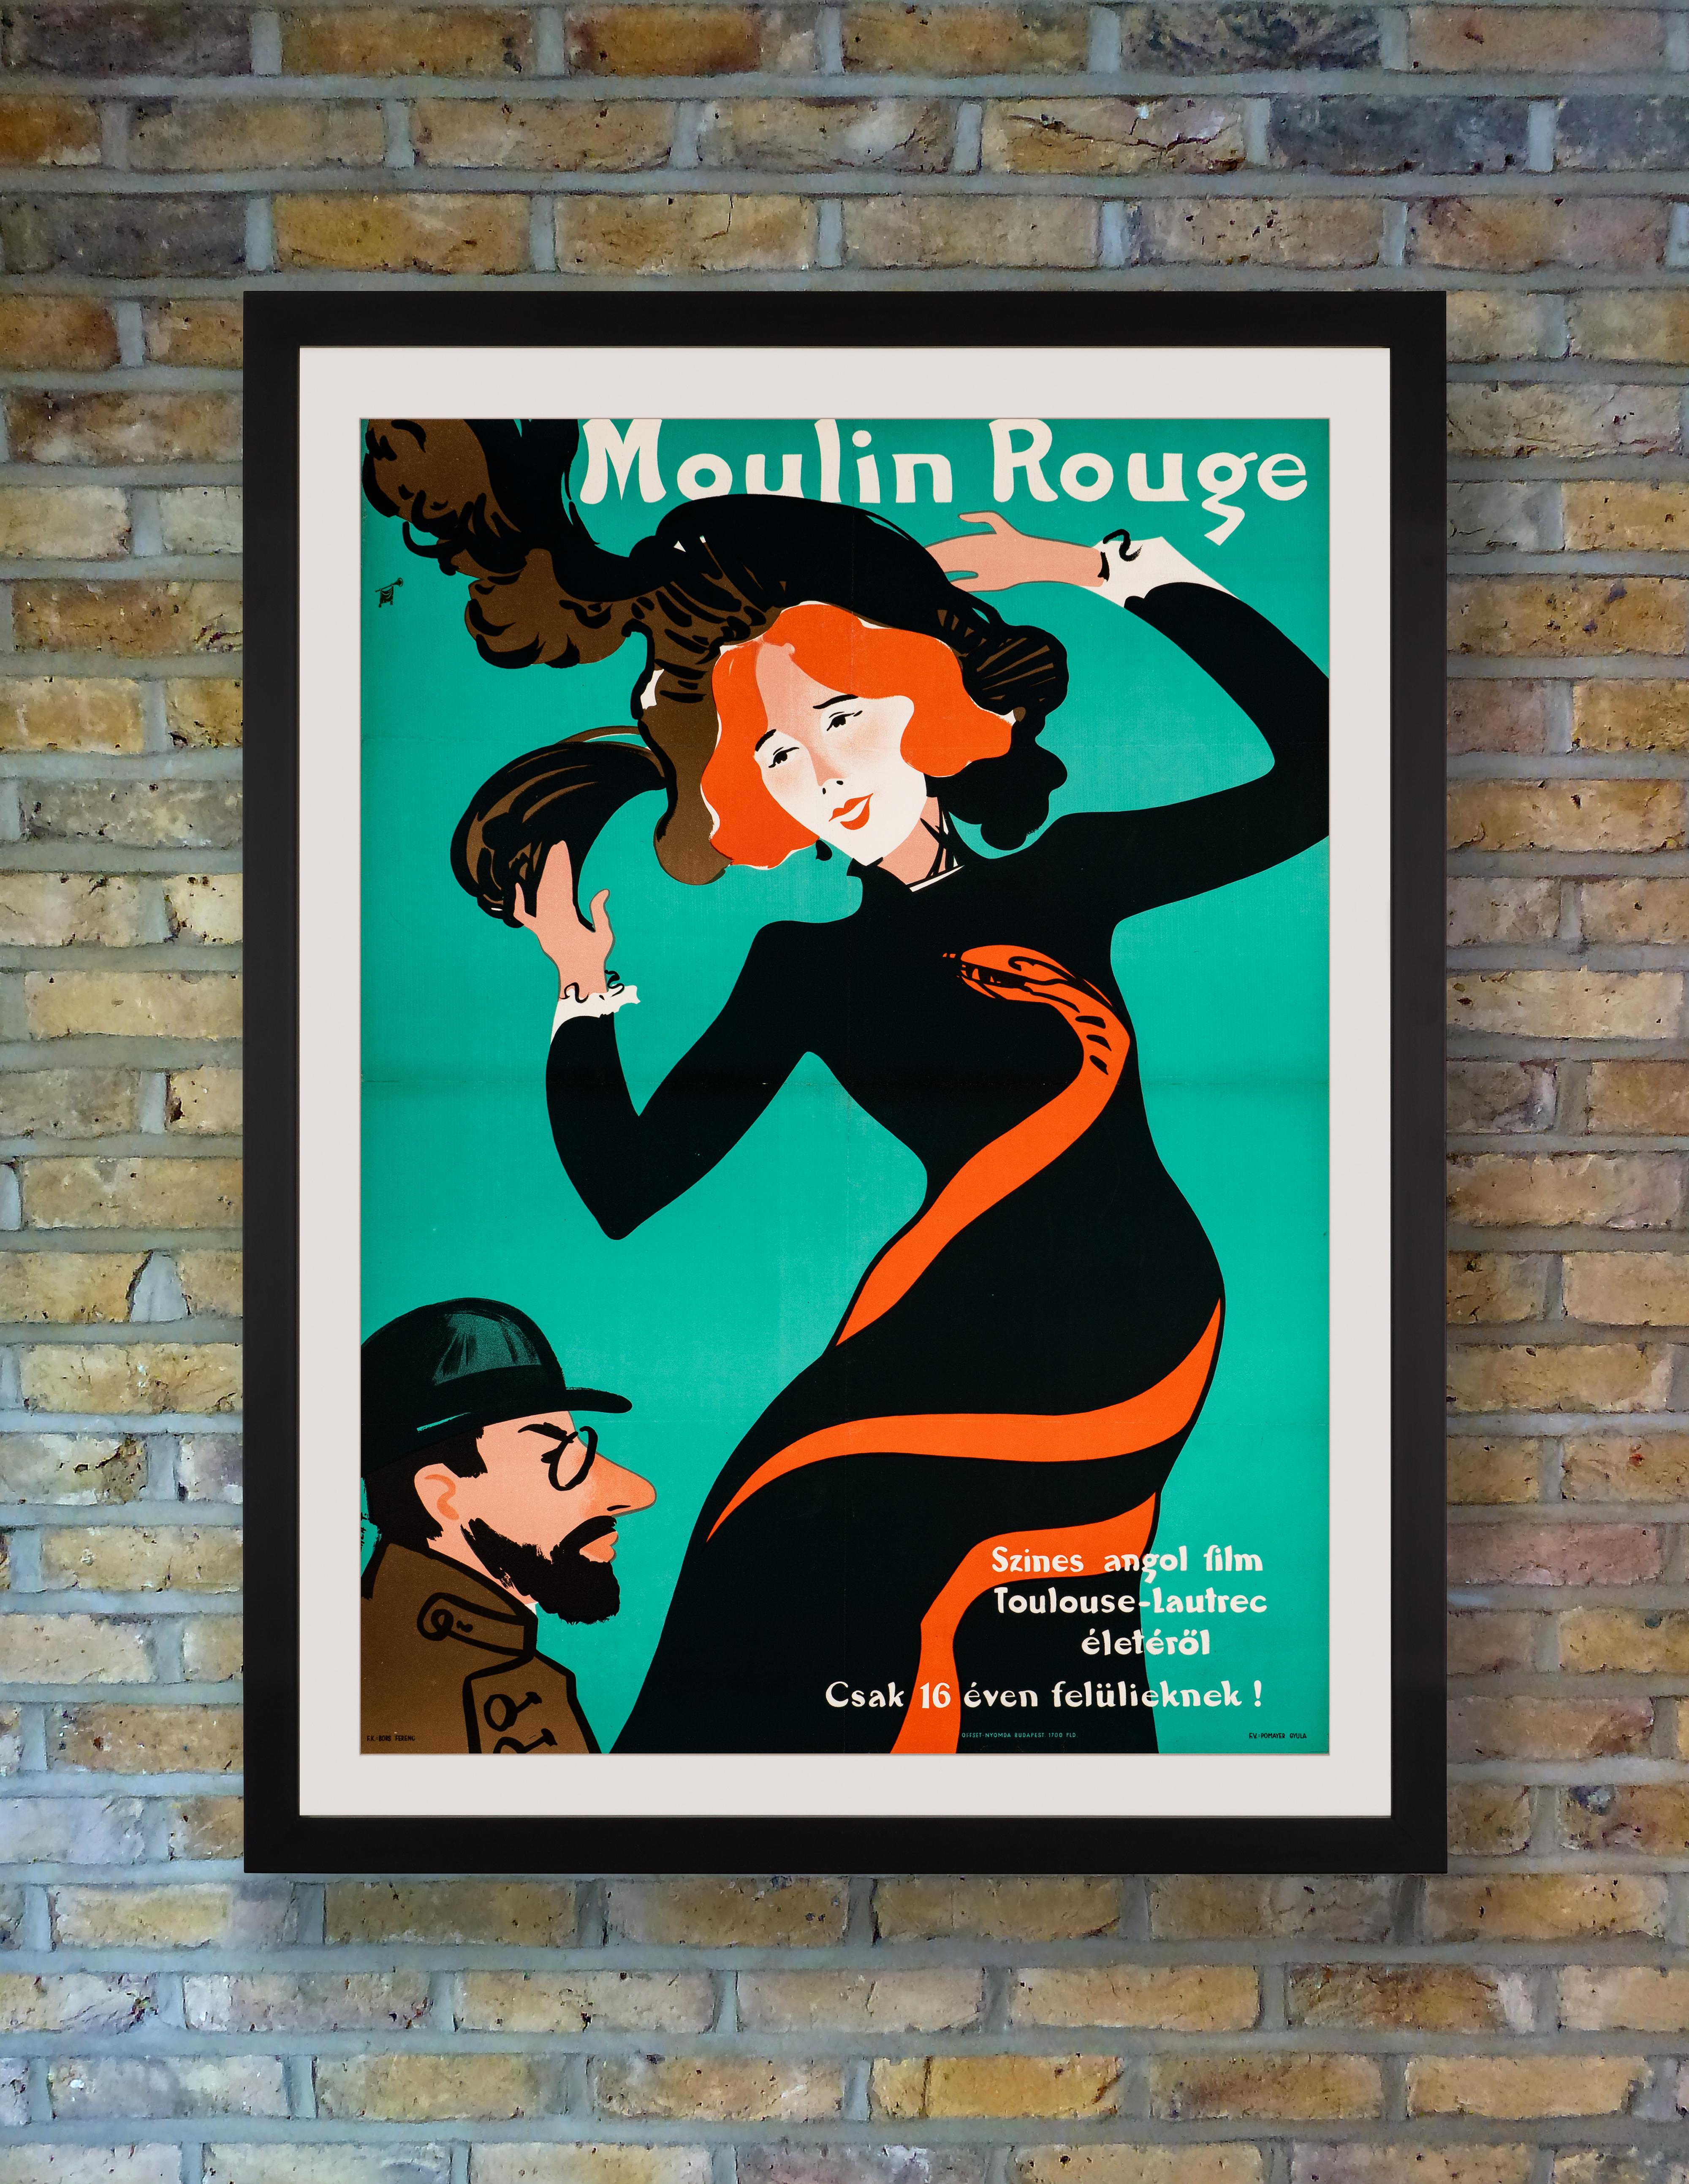 Based on the novel by Pierre La Mure, the 1952 British film 'Moulin Rouge' is a fictionalised account of the life of street artist Henri de Toulouse-Lautrec as he pursues his art in 19th century bohemian Paris and finds solace among the other